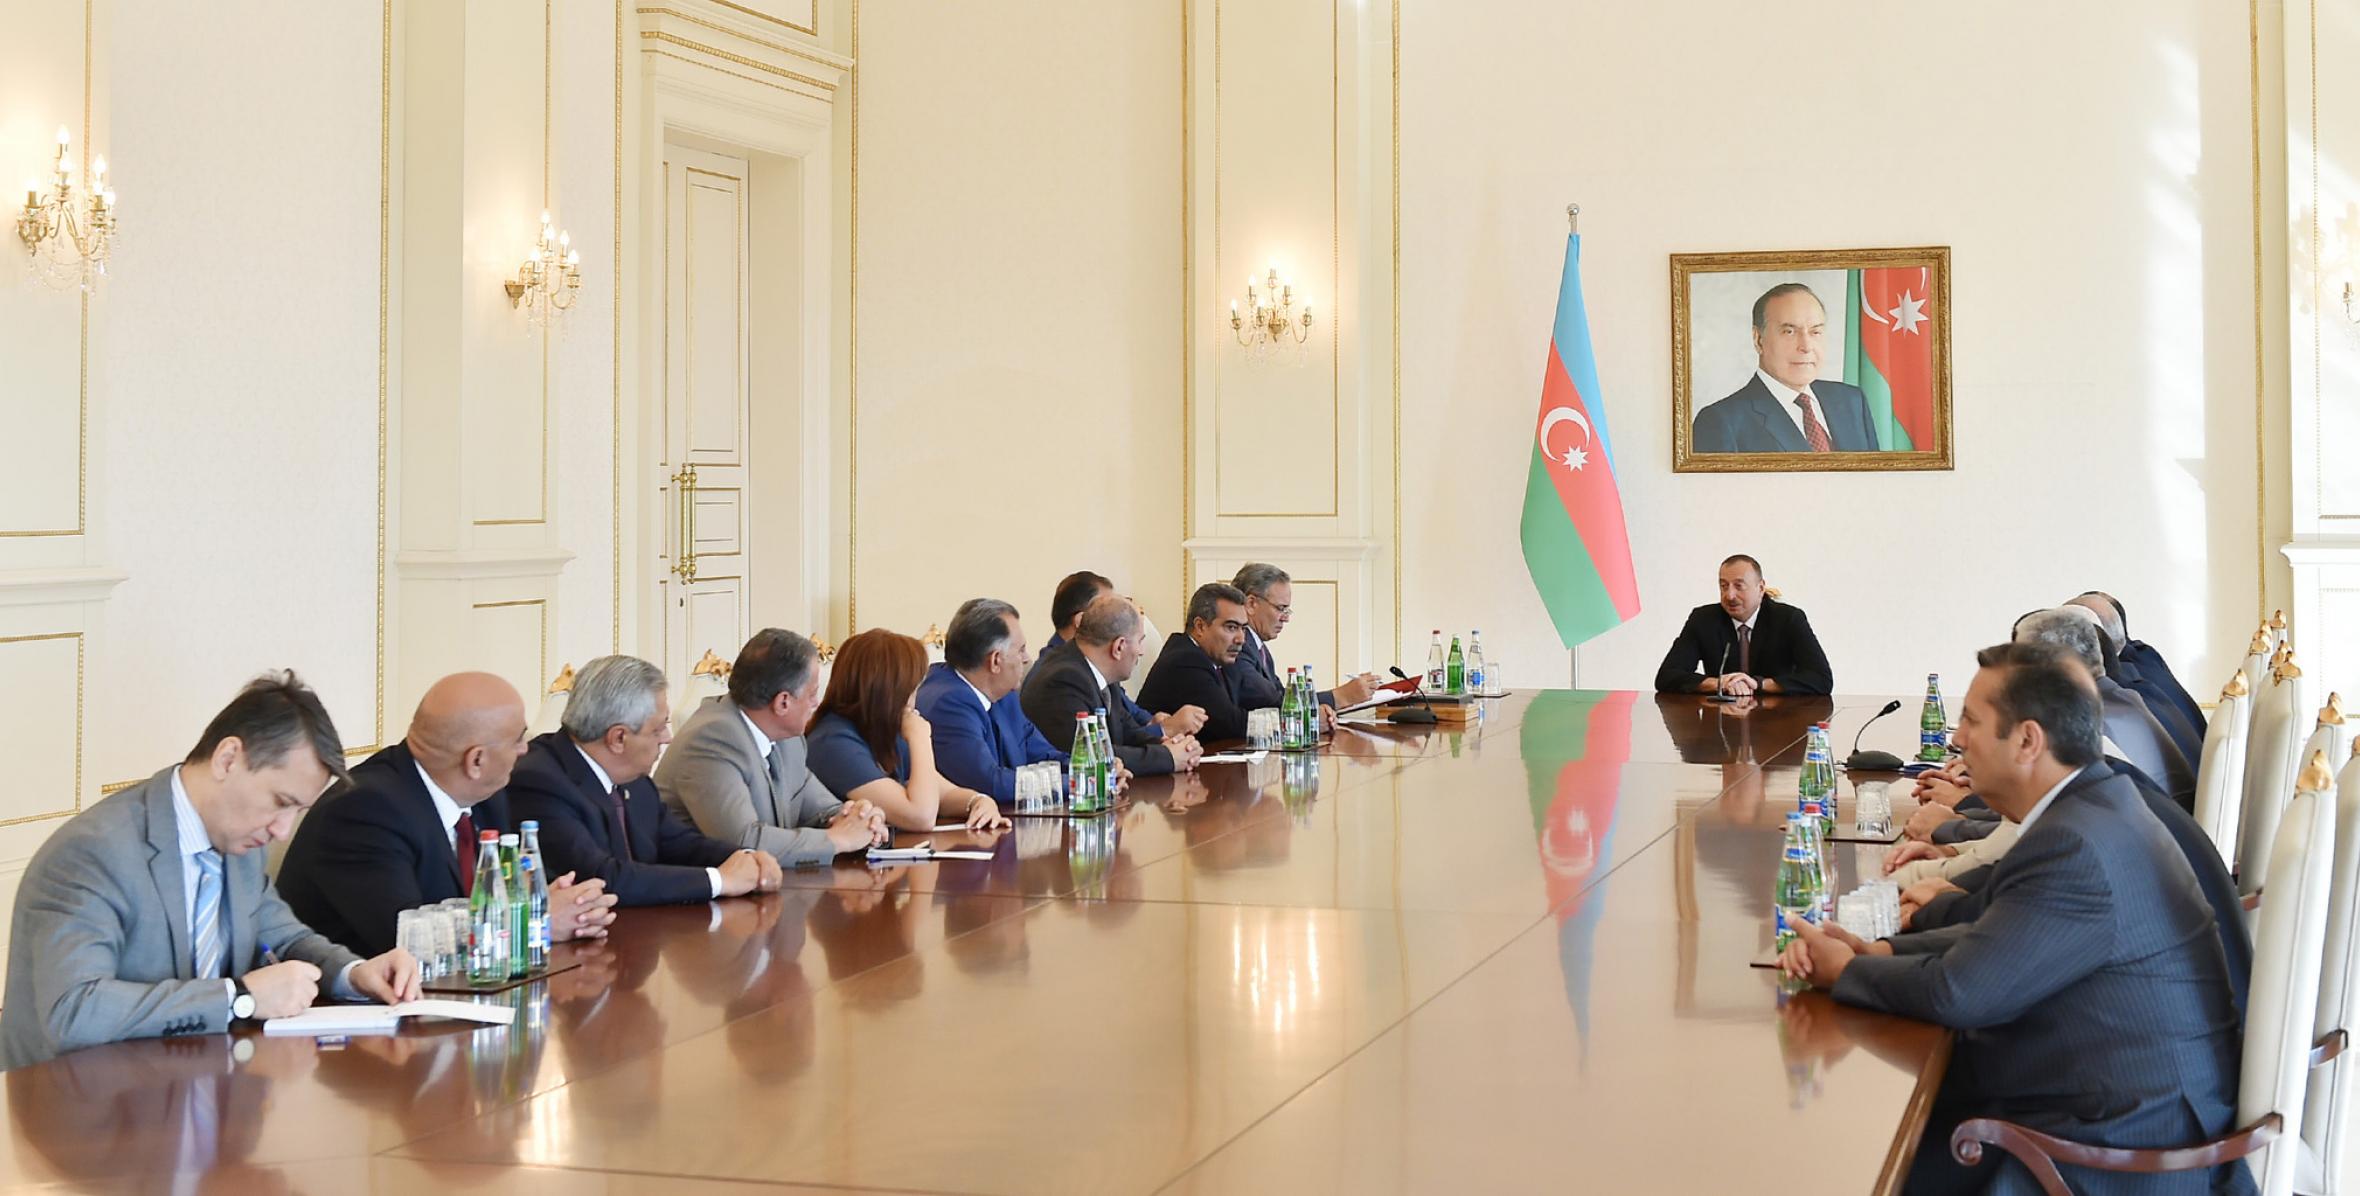 Speech by Ilham Aliyev at the meeting of the the Board of Directors of the Press Council on the occasion of the 140th anniversary of the national press